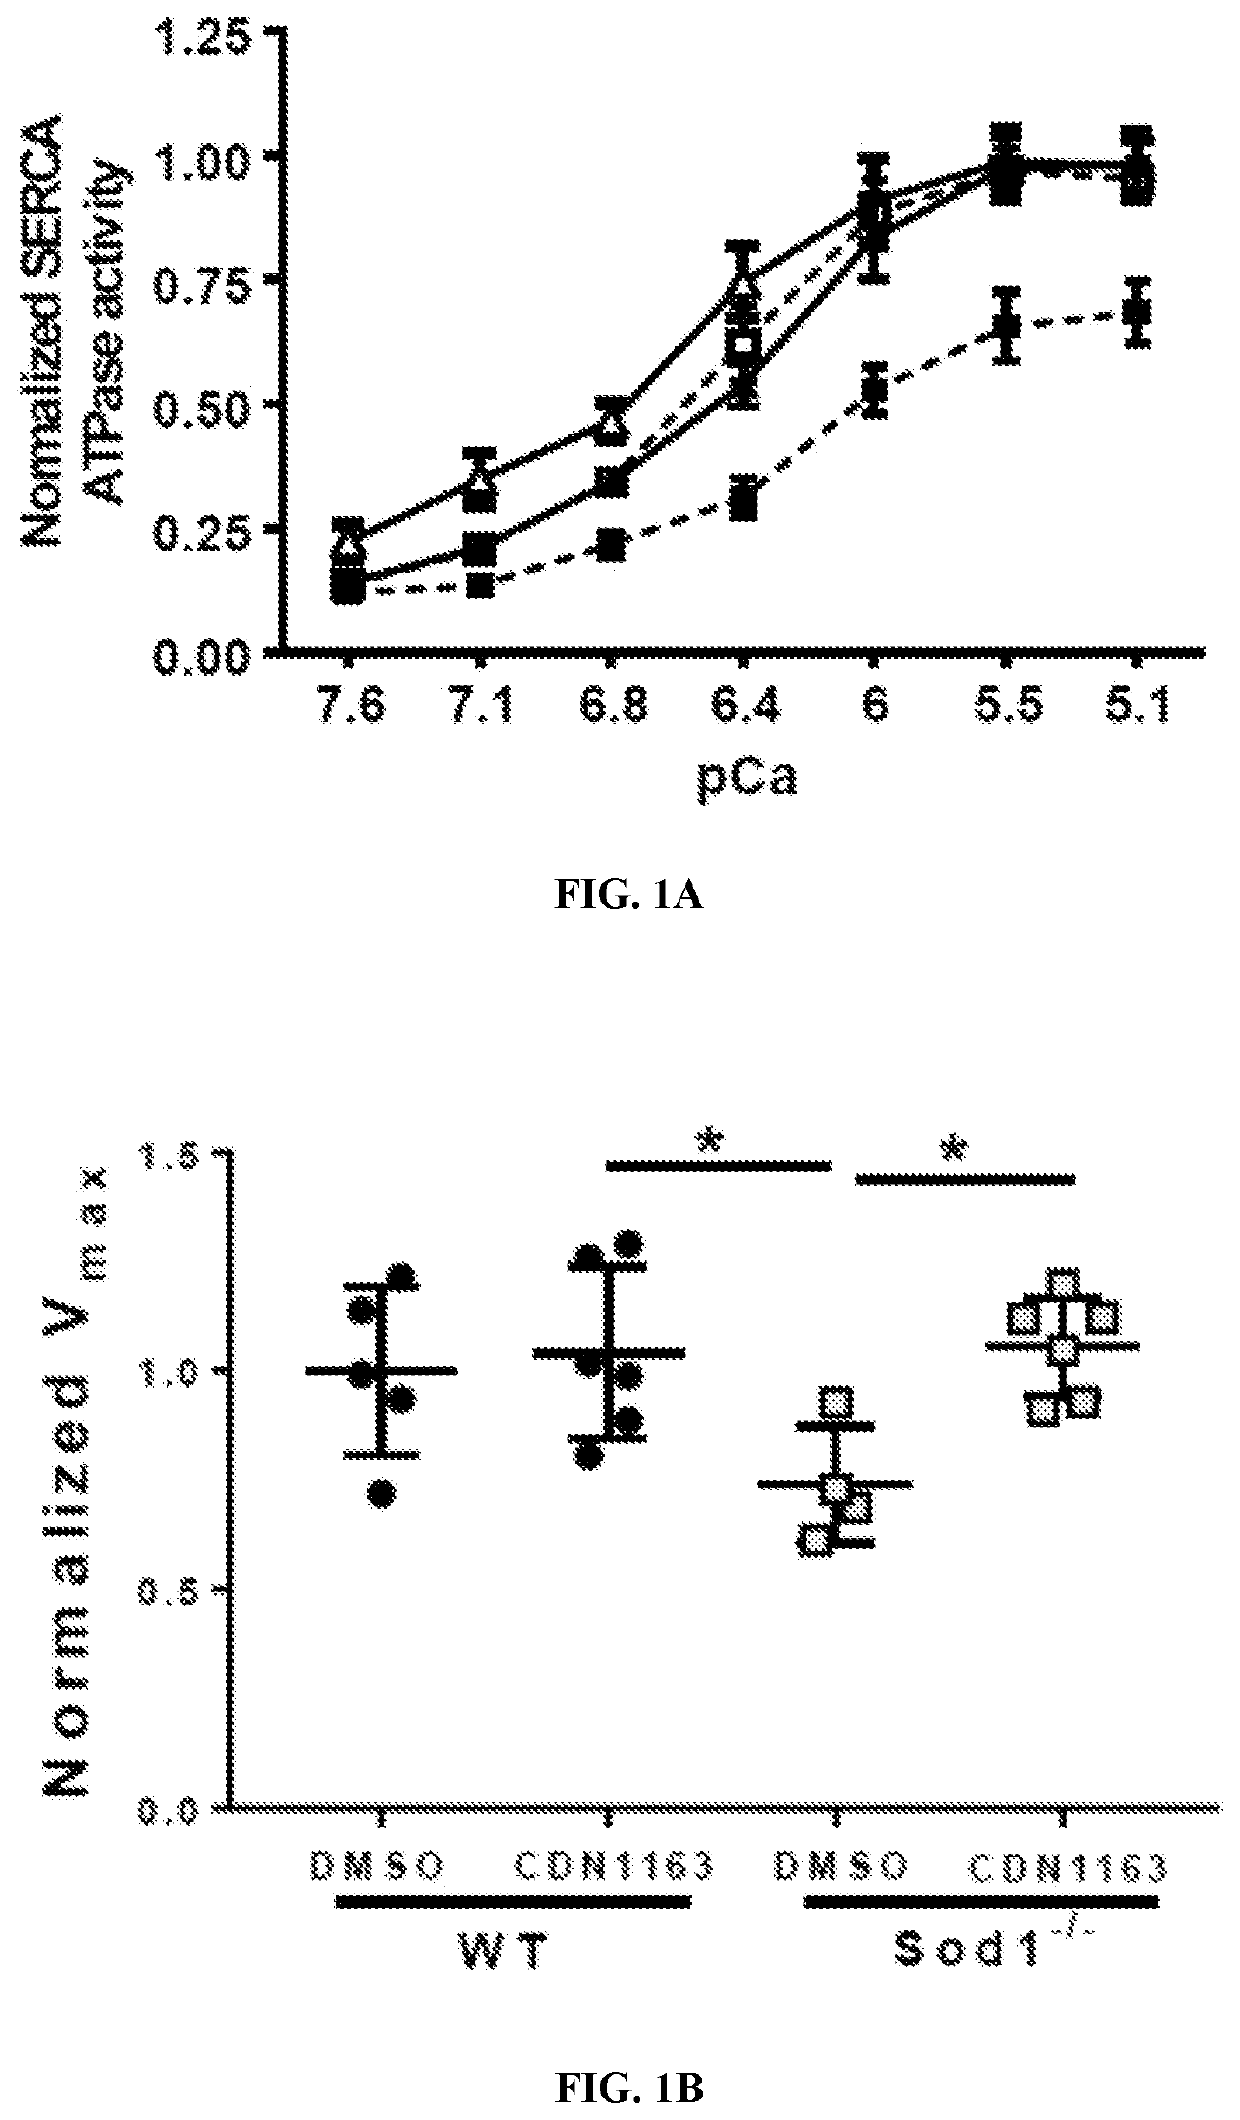 Treatment for age- and oxidative stress-associated muscle atrophy and weakness